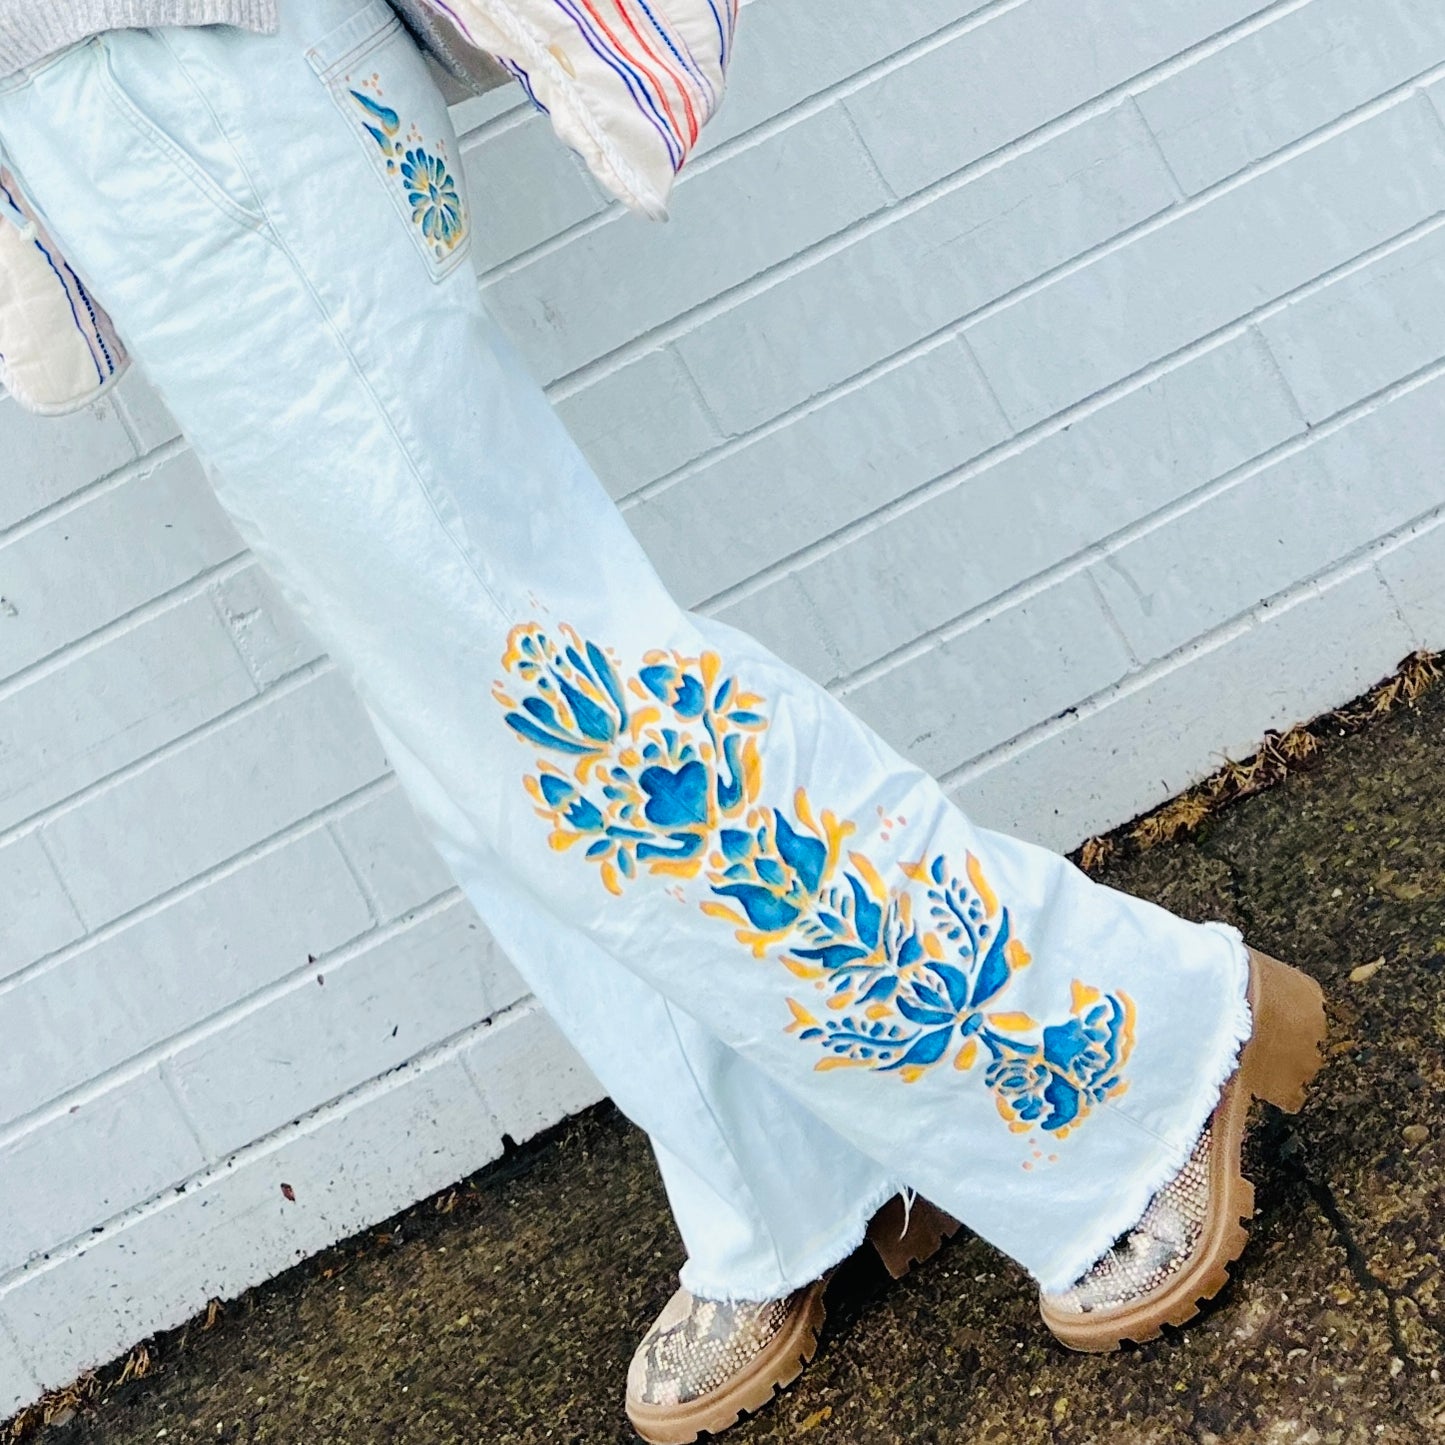 Mural in Movement Drawstring Pants, Hand-painted Thrift Flip Fashion